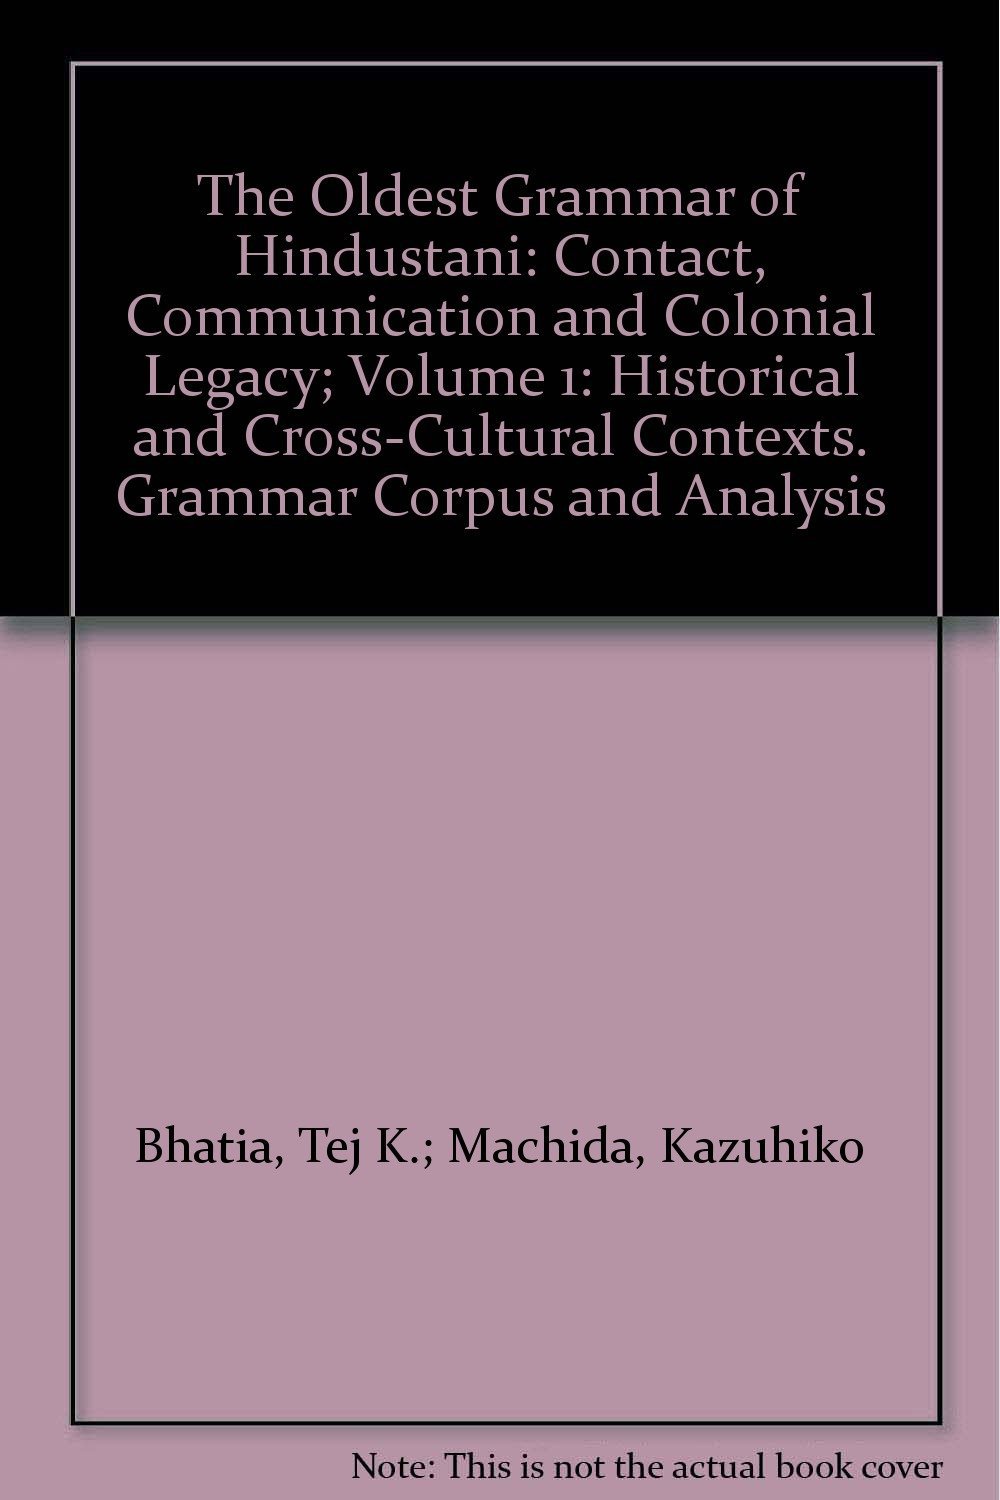 The Oldest Grammar of Hindustani: Contact, Communication and Colonial Legacy; Volume 1: Historical and Cross-Cultural Contexts. Grammar Corpus and Analysis